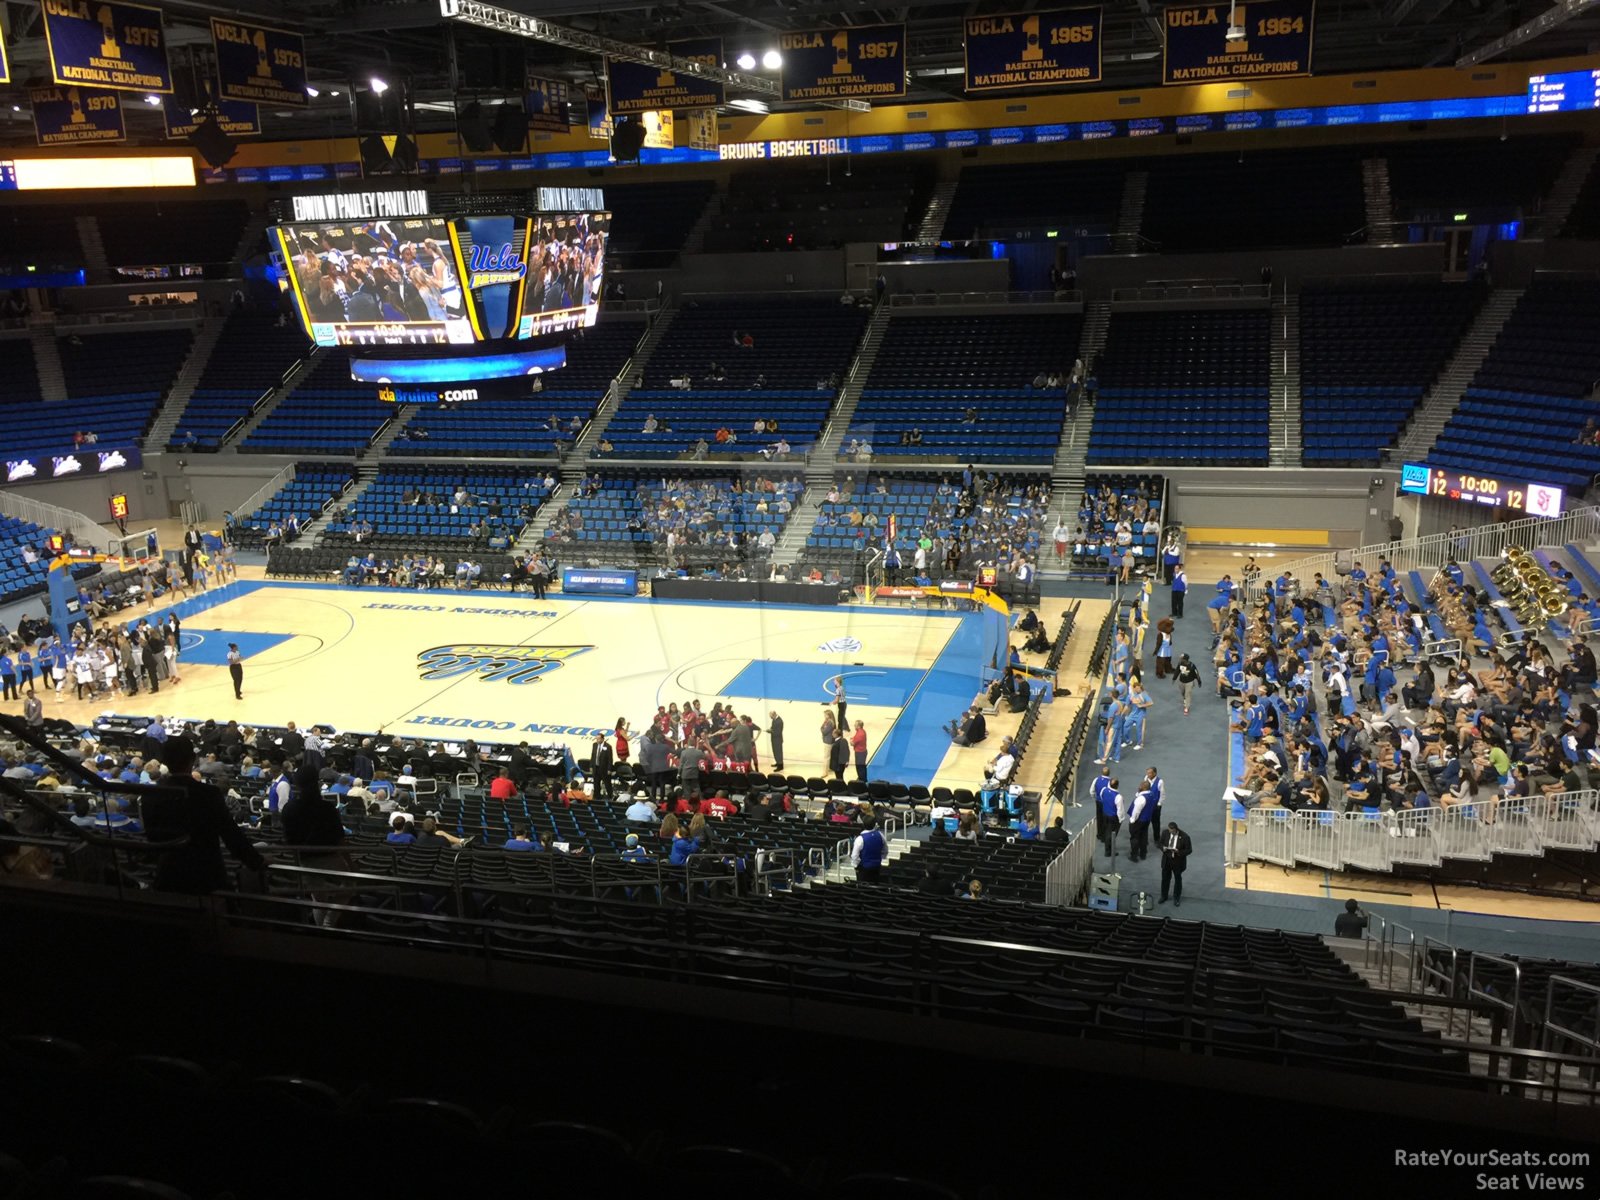 section 225, row 6 seat view  - pauley pavilion